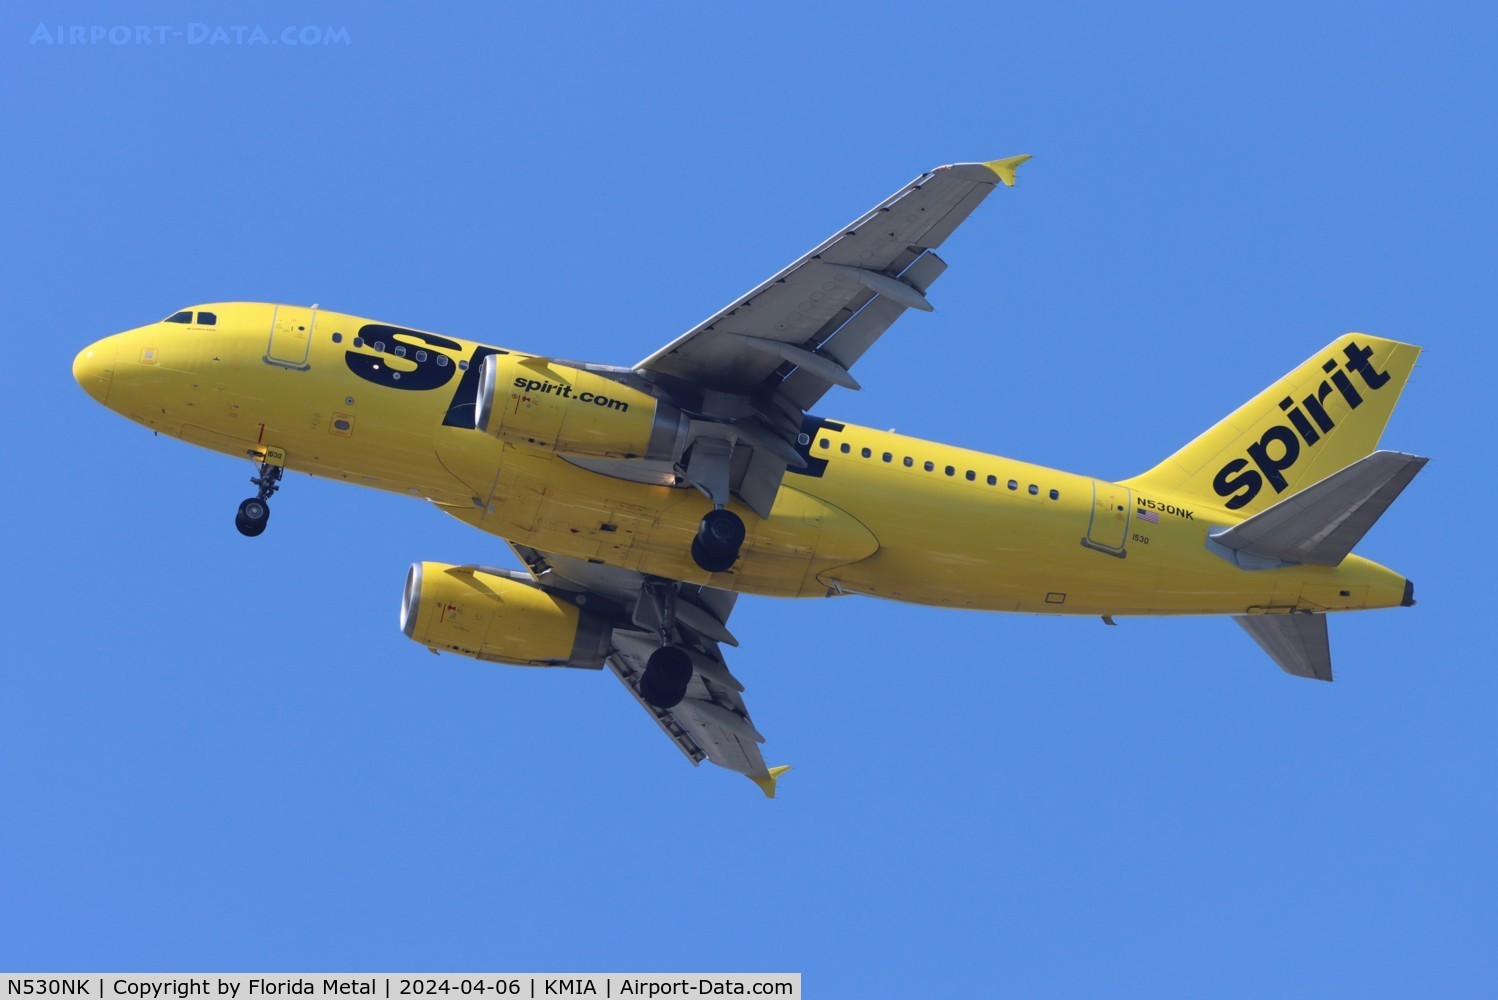 N530NK, 2007 Airbus A319-132 C/N 3017, NKS A319 yellow zx BWI-MIA